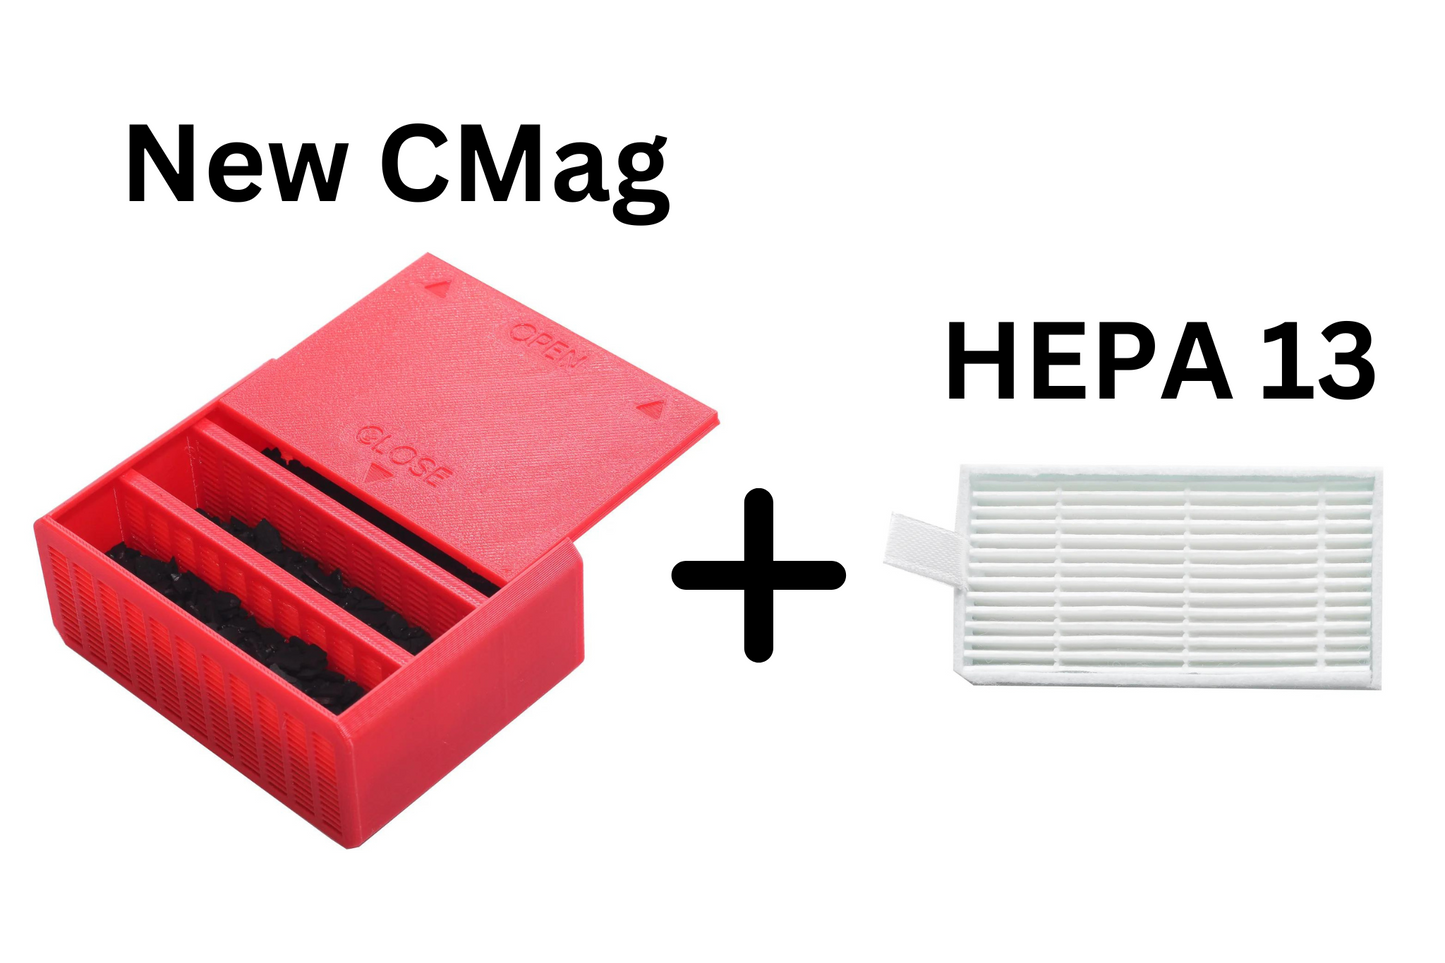 Bento Box New CMag (Filled with Carbon) + HEPA13 Combo